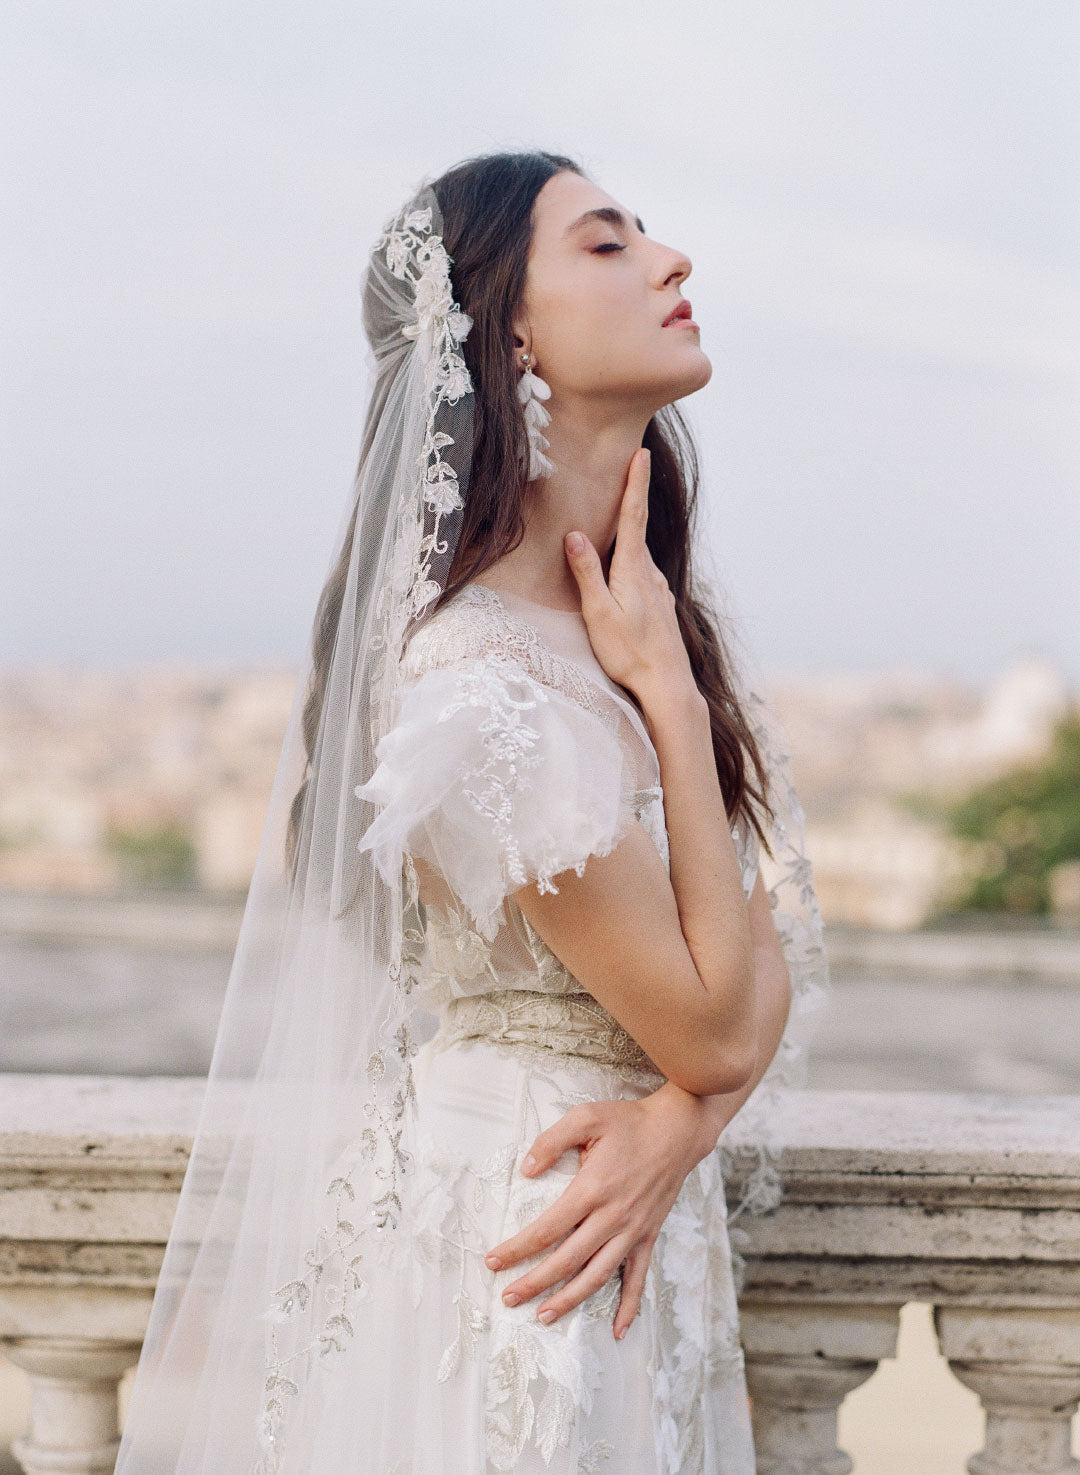 Bride in Chloris Wedding Dress and Veil by Claire Pettibone